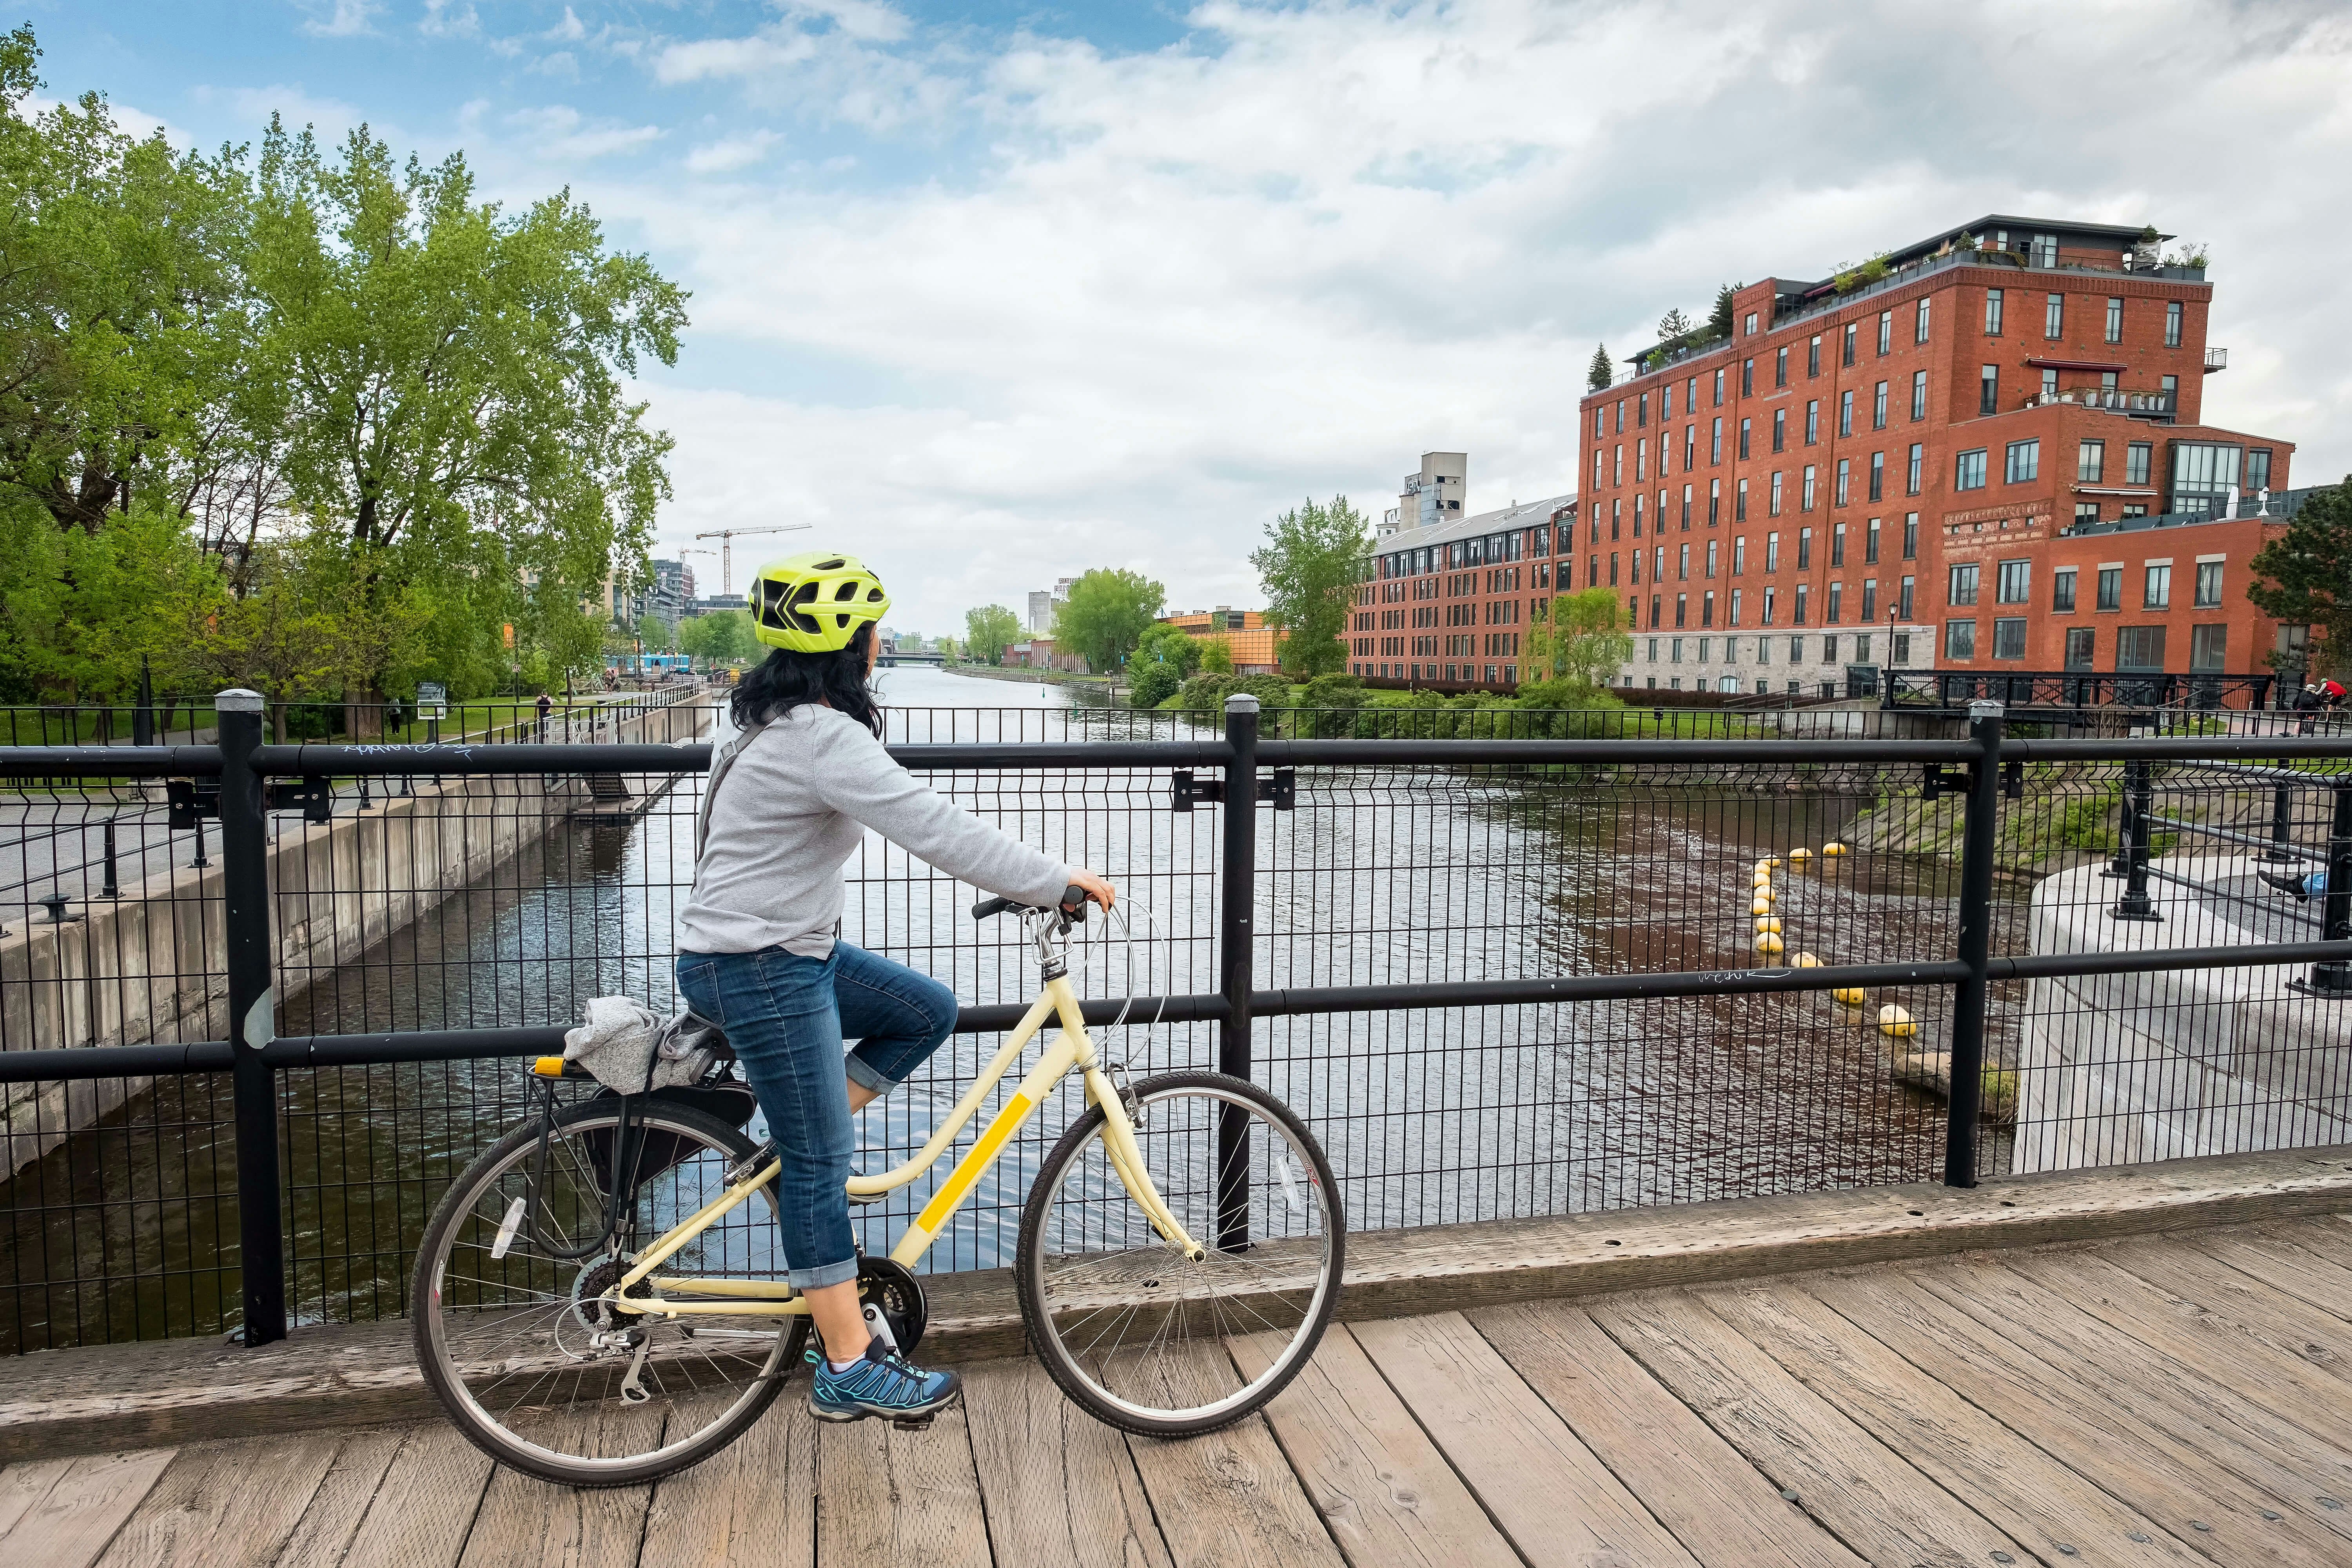 A bike rider pauses on a bridge overlooking a canal